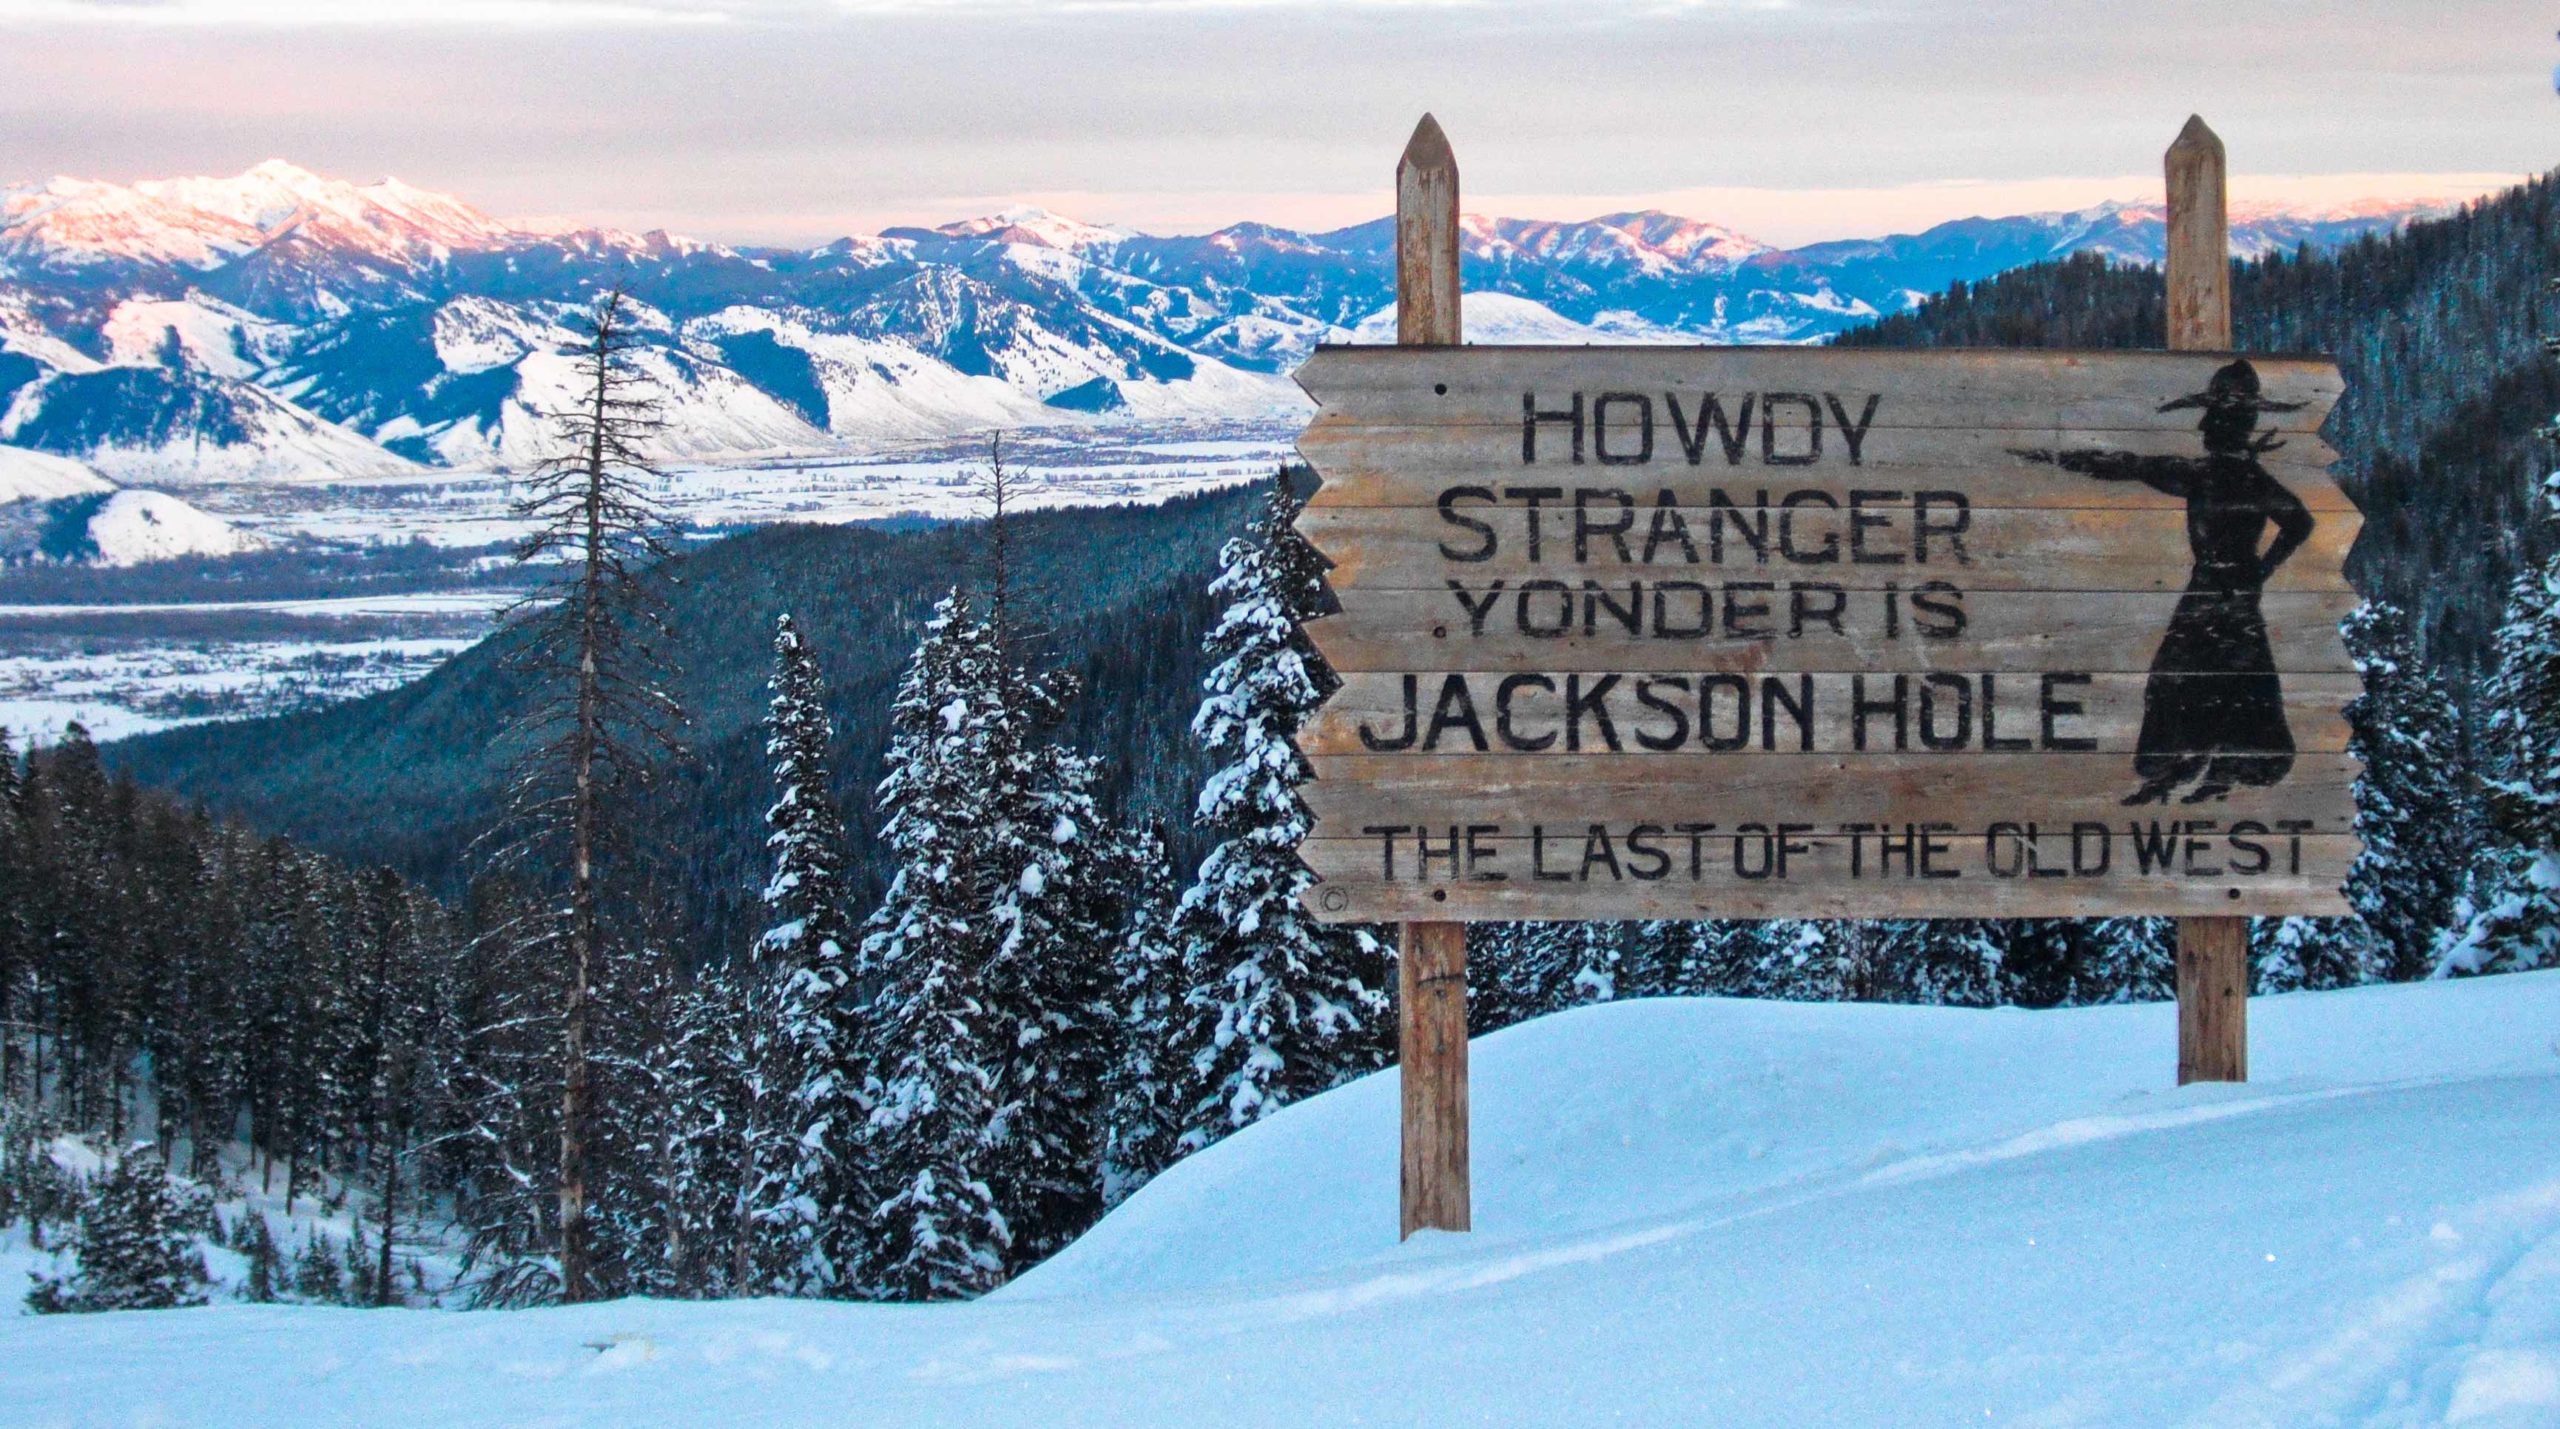 Jackson Hole Sign in Winter-Howdy Stranger-Yonder is Jackson Hole-The Last of the Old West